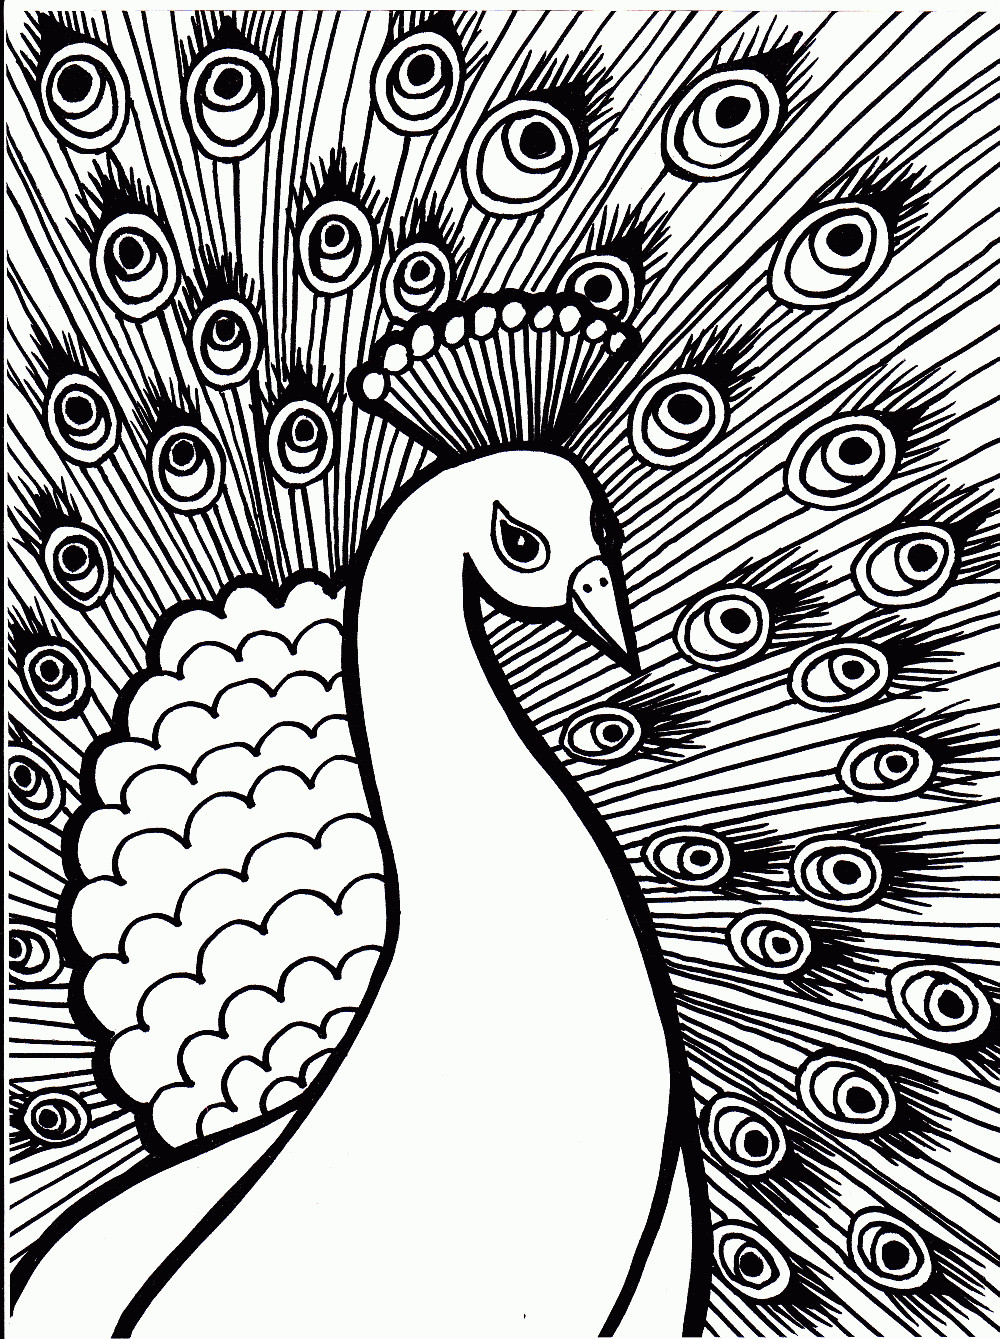 Peacock Coloring Sheet
 Free Printable Peacock Coloring Pages For Kids